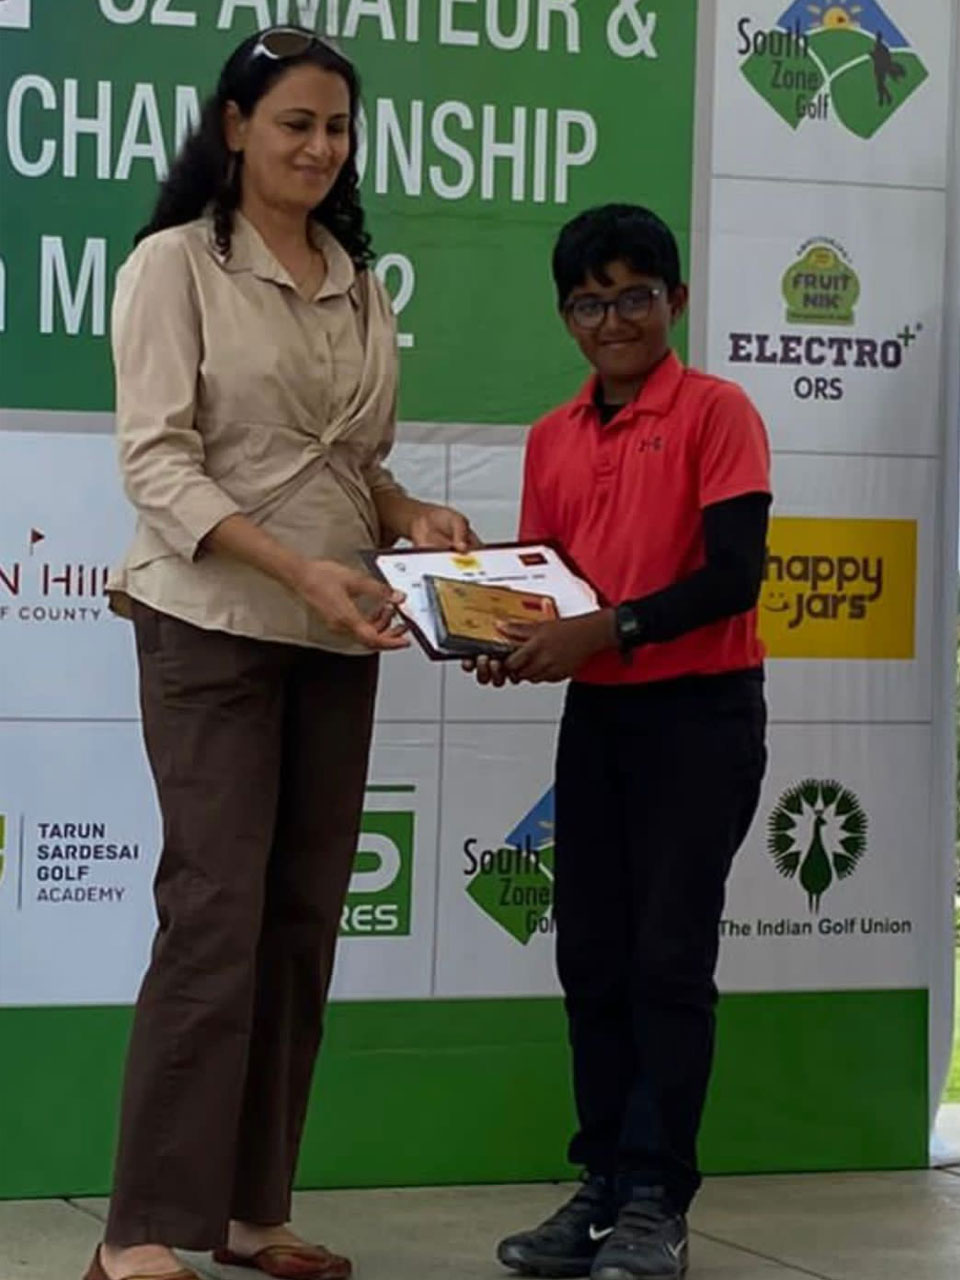 Nilofer Sivamoorthy finished 3rd in Category C Boys